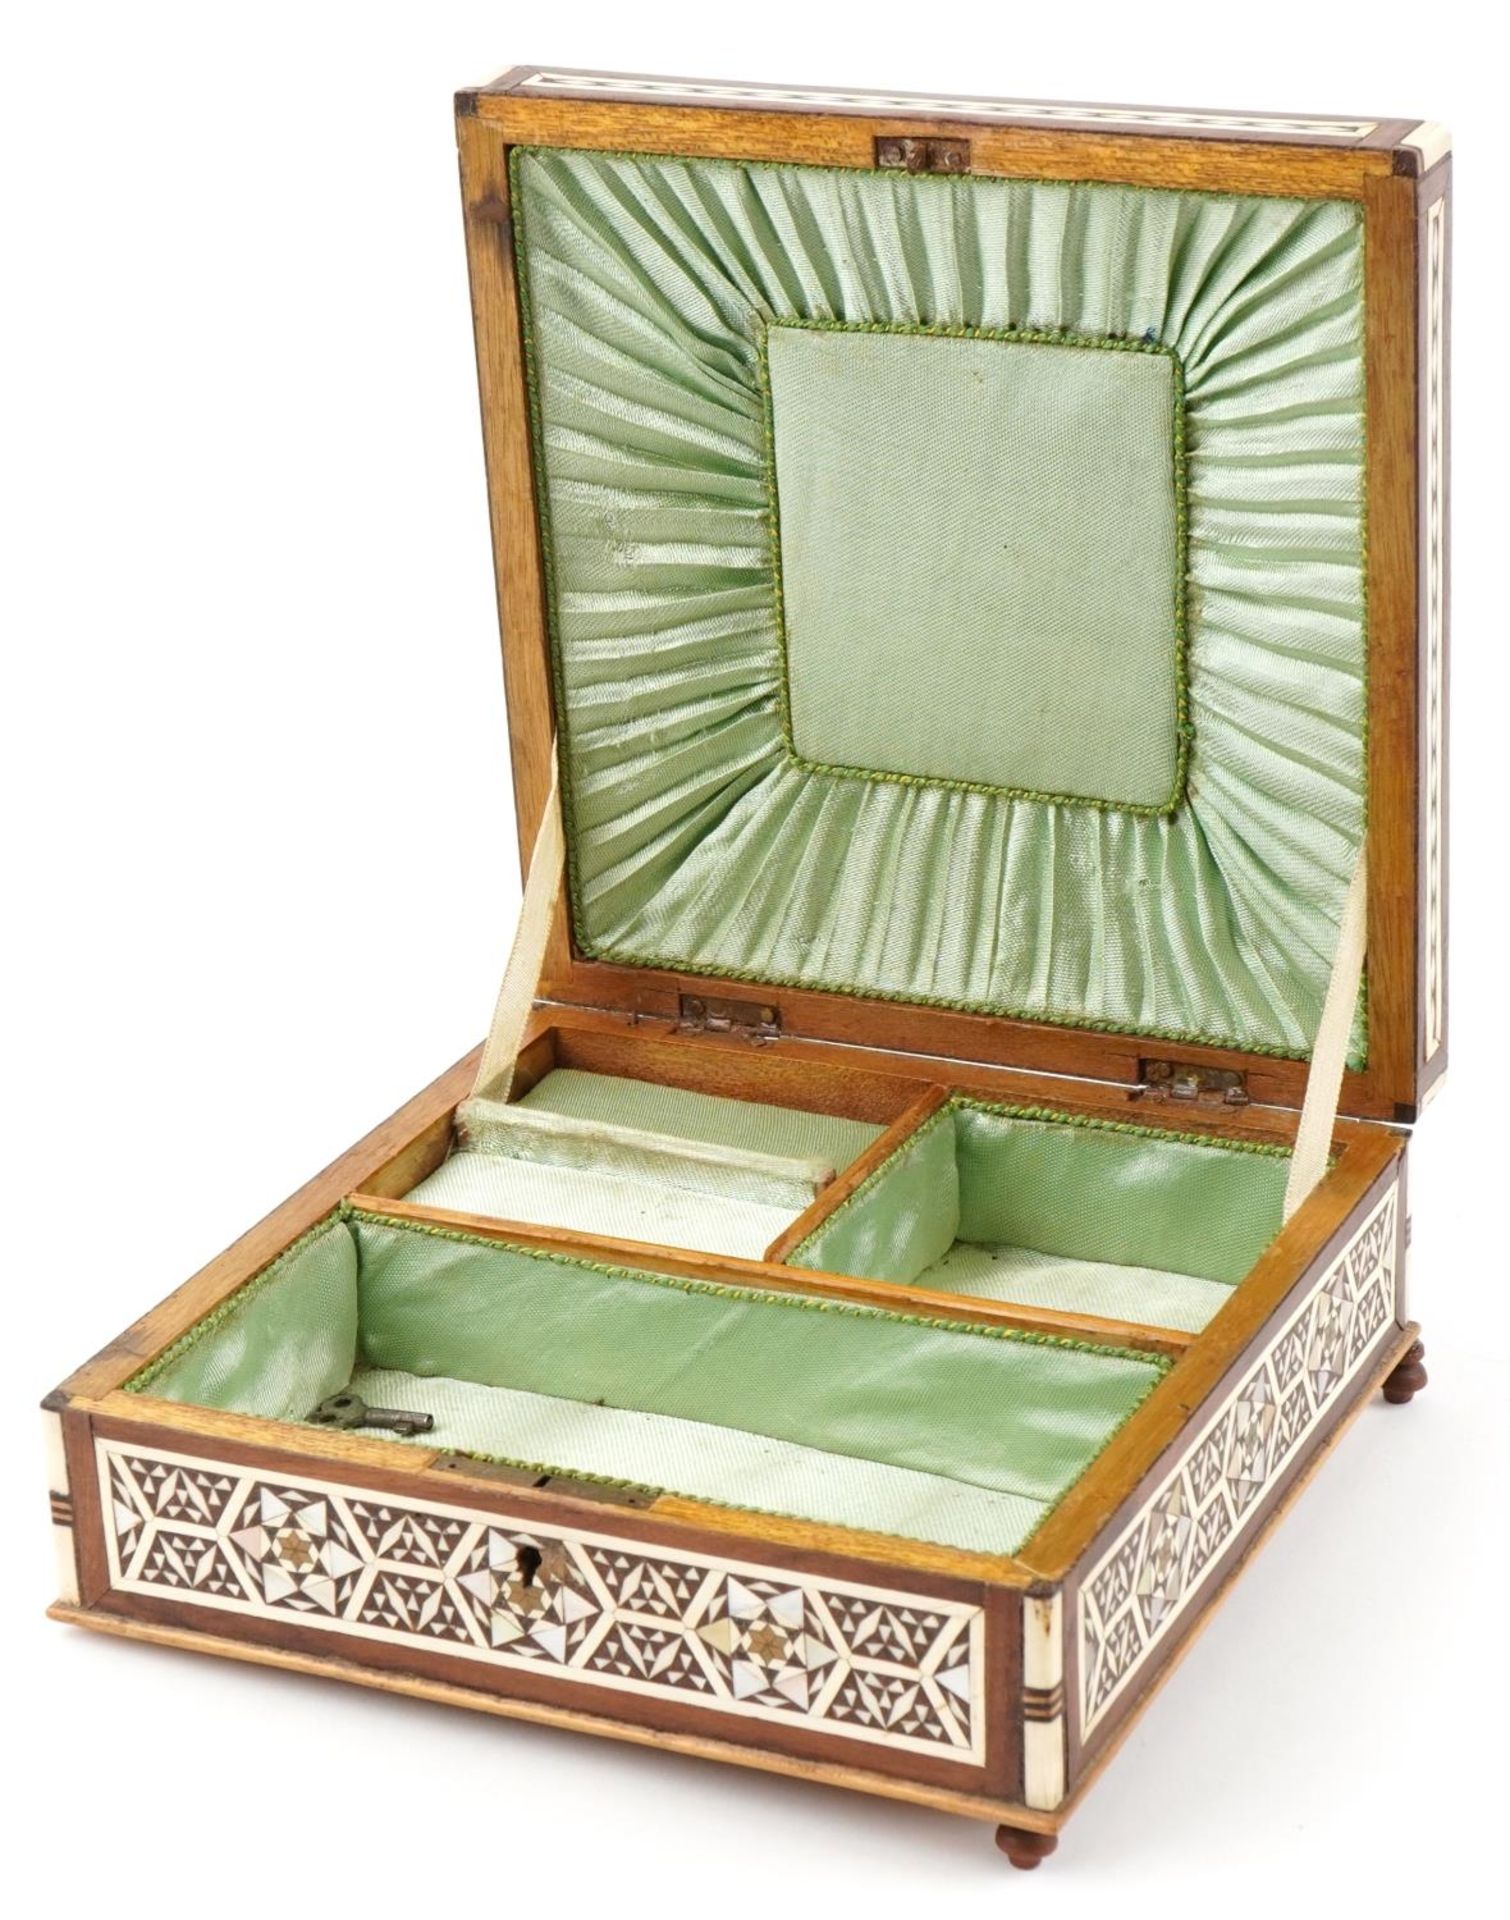 Moorish style Vizagapatam design musical jewellery box with bone and mother of pearl inlay, 8.5cm - Image 2 of 6